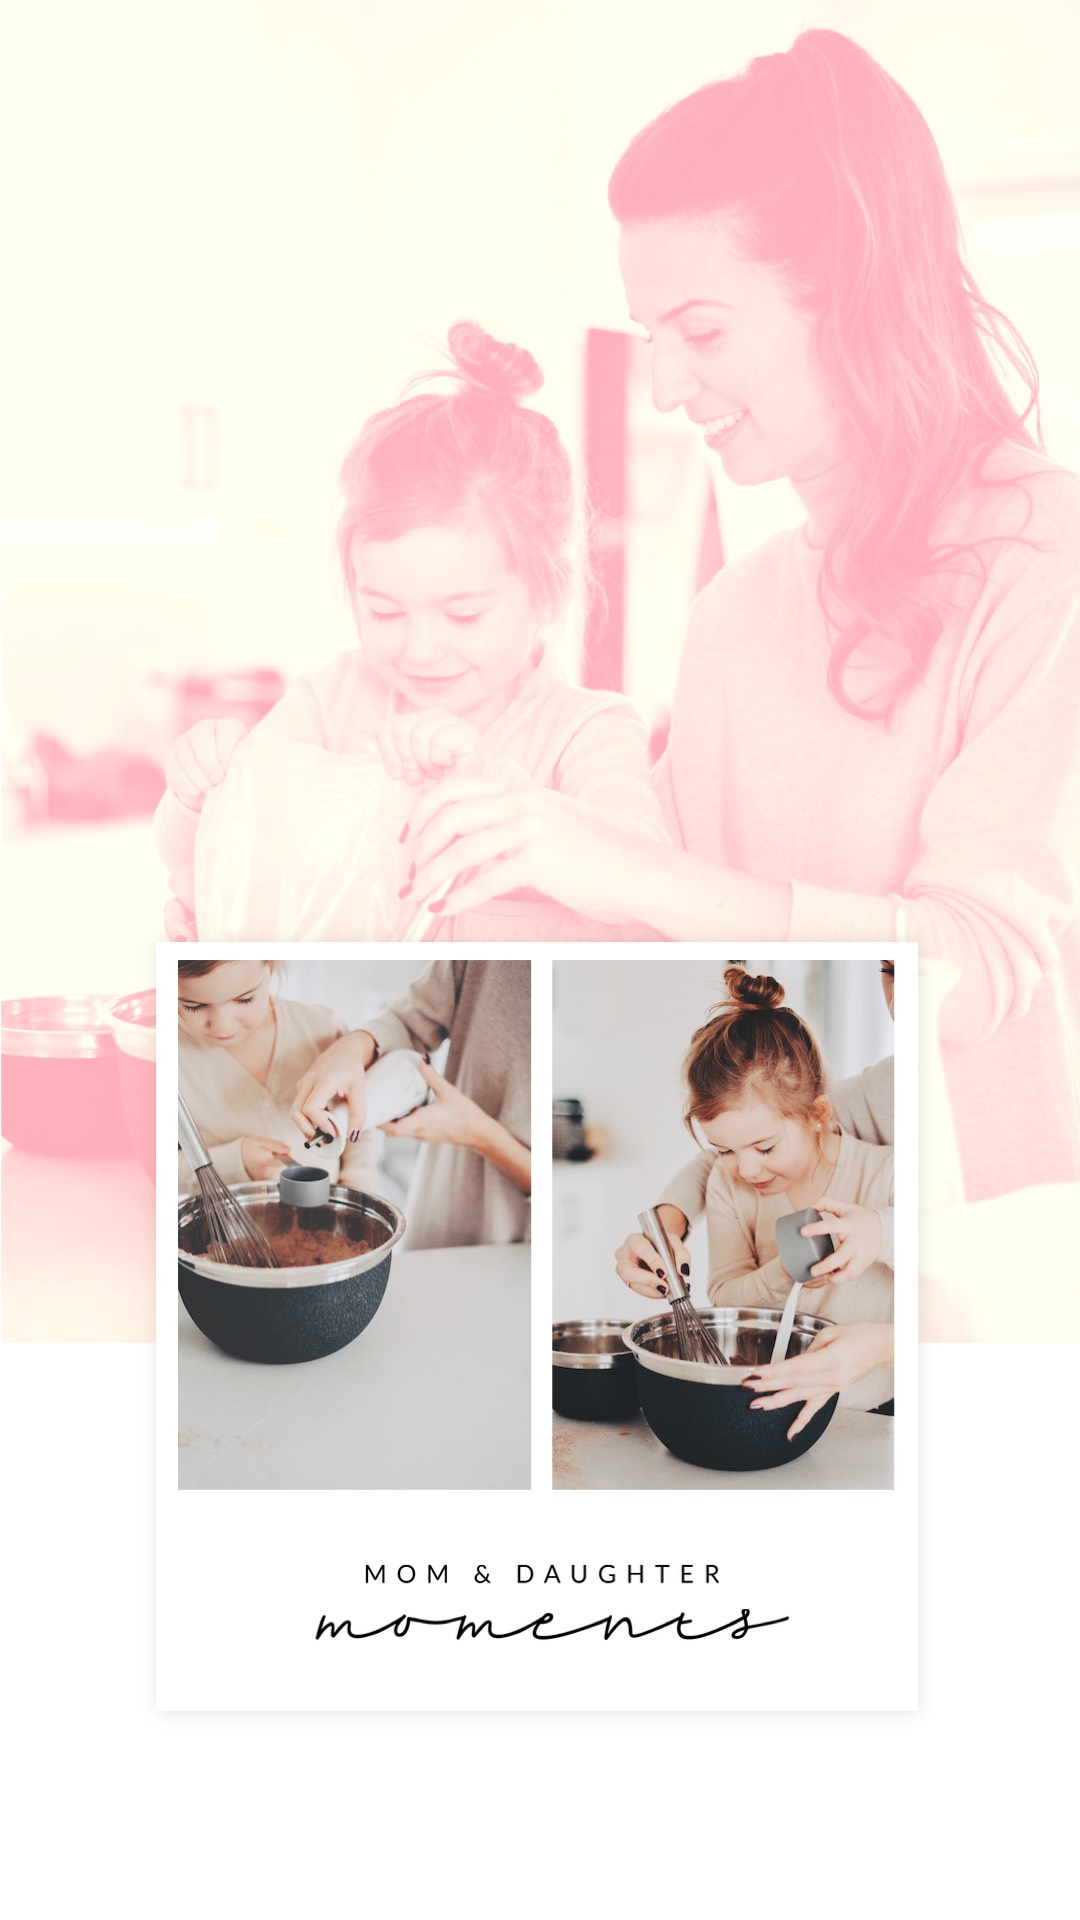 Mom & daughter moments family template